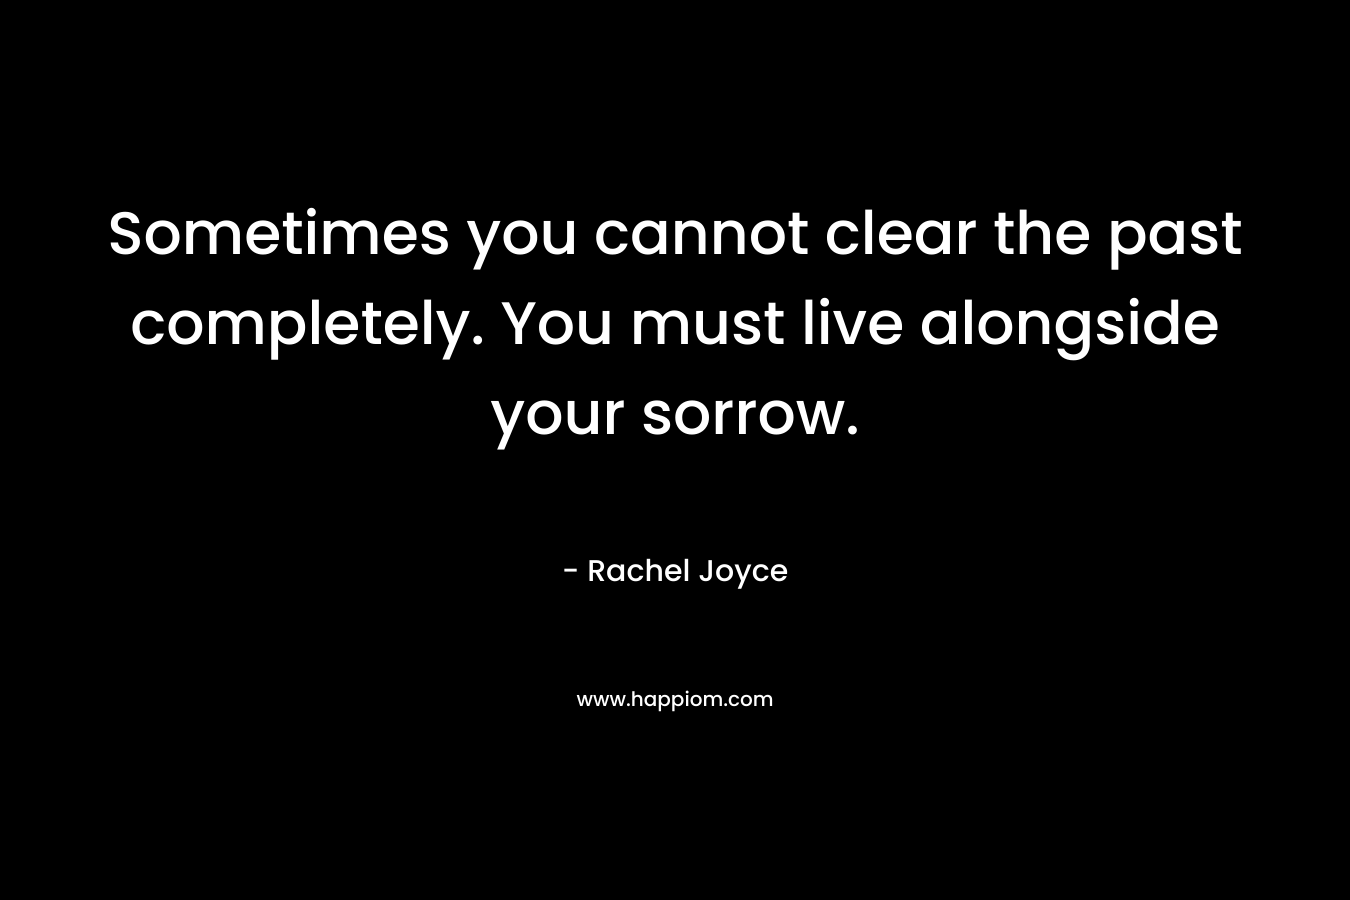 Sometimes you cannot clear the past completely. You must live alongside your sorrow.